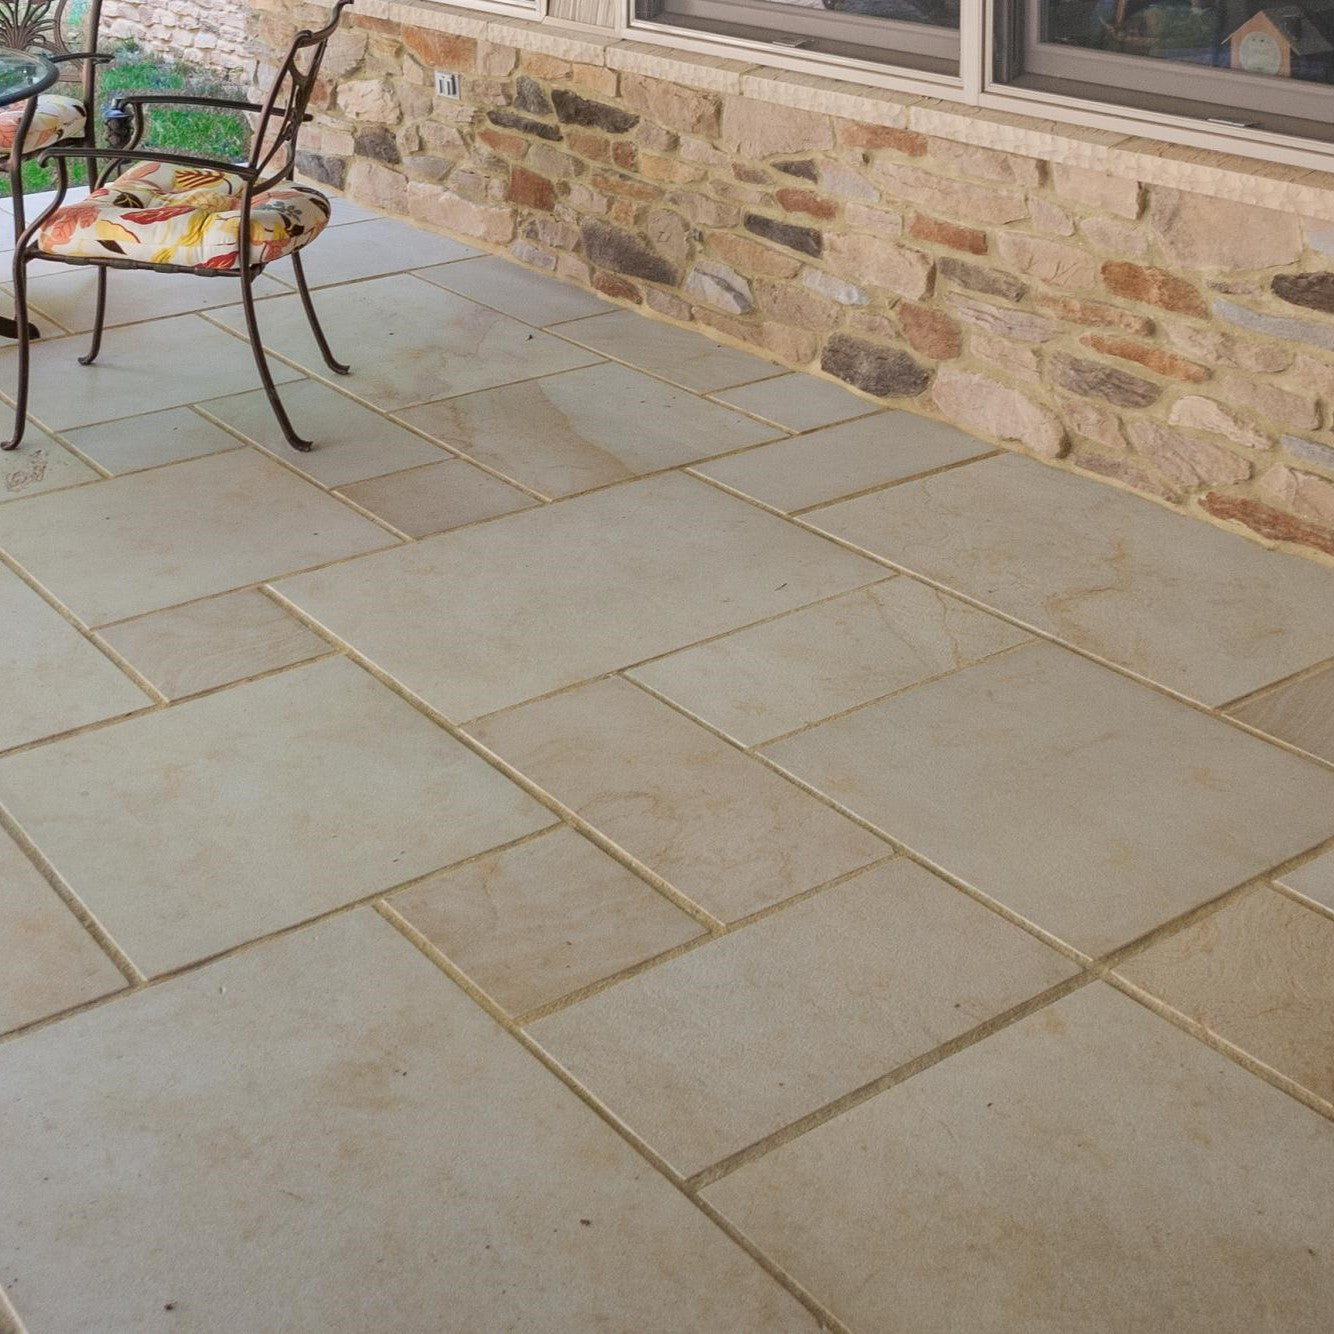 Signature Series Flagstone Collection, showcasing luxurious color blends and a precision sawn finish for a sophisticated and elegant appearance.